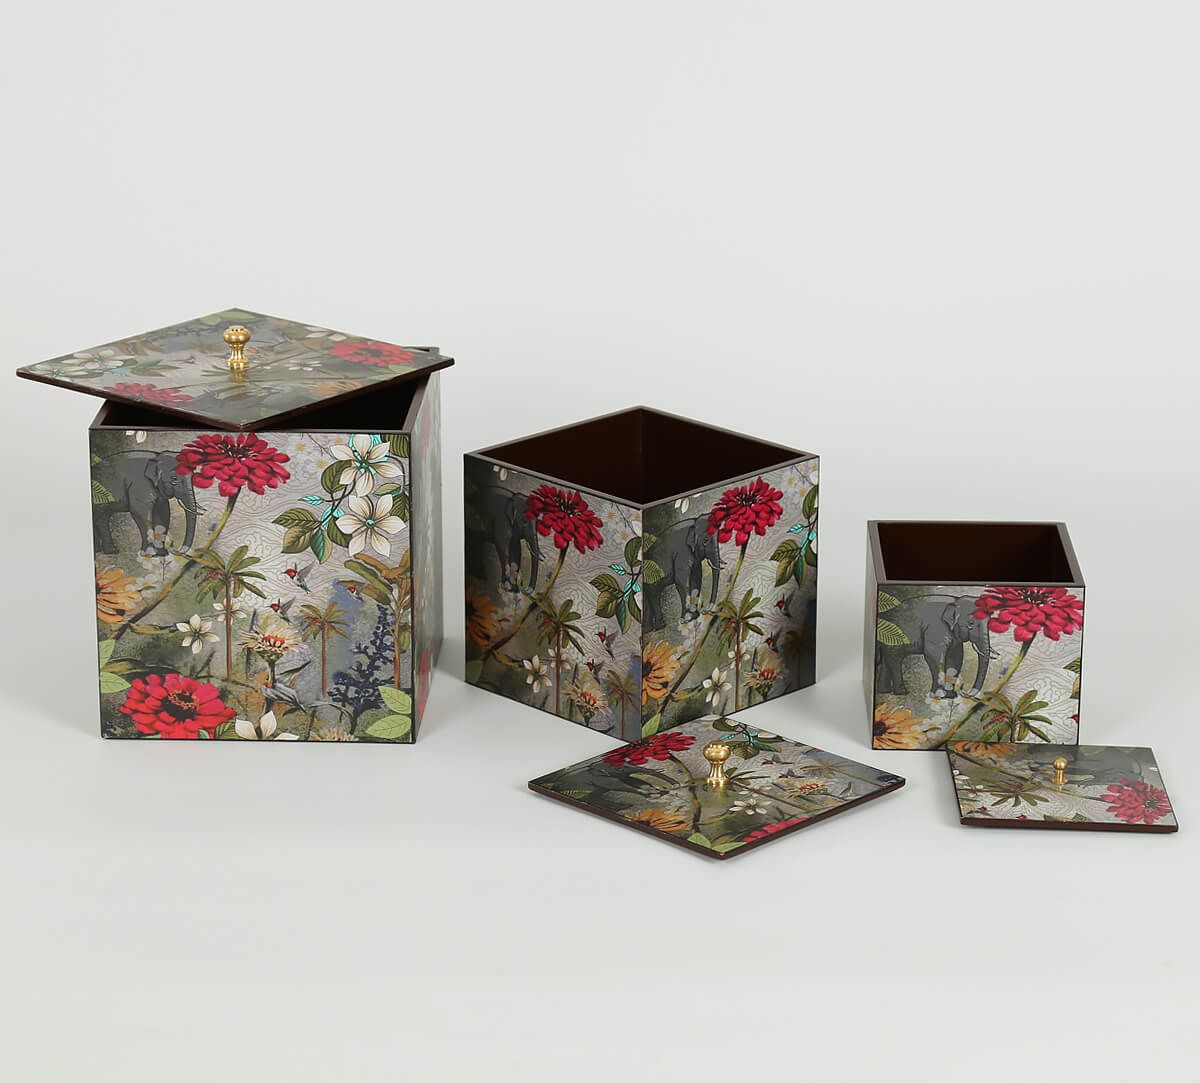 India Circus by Krsnaa Mehta March of the Blossoms Storage Box